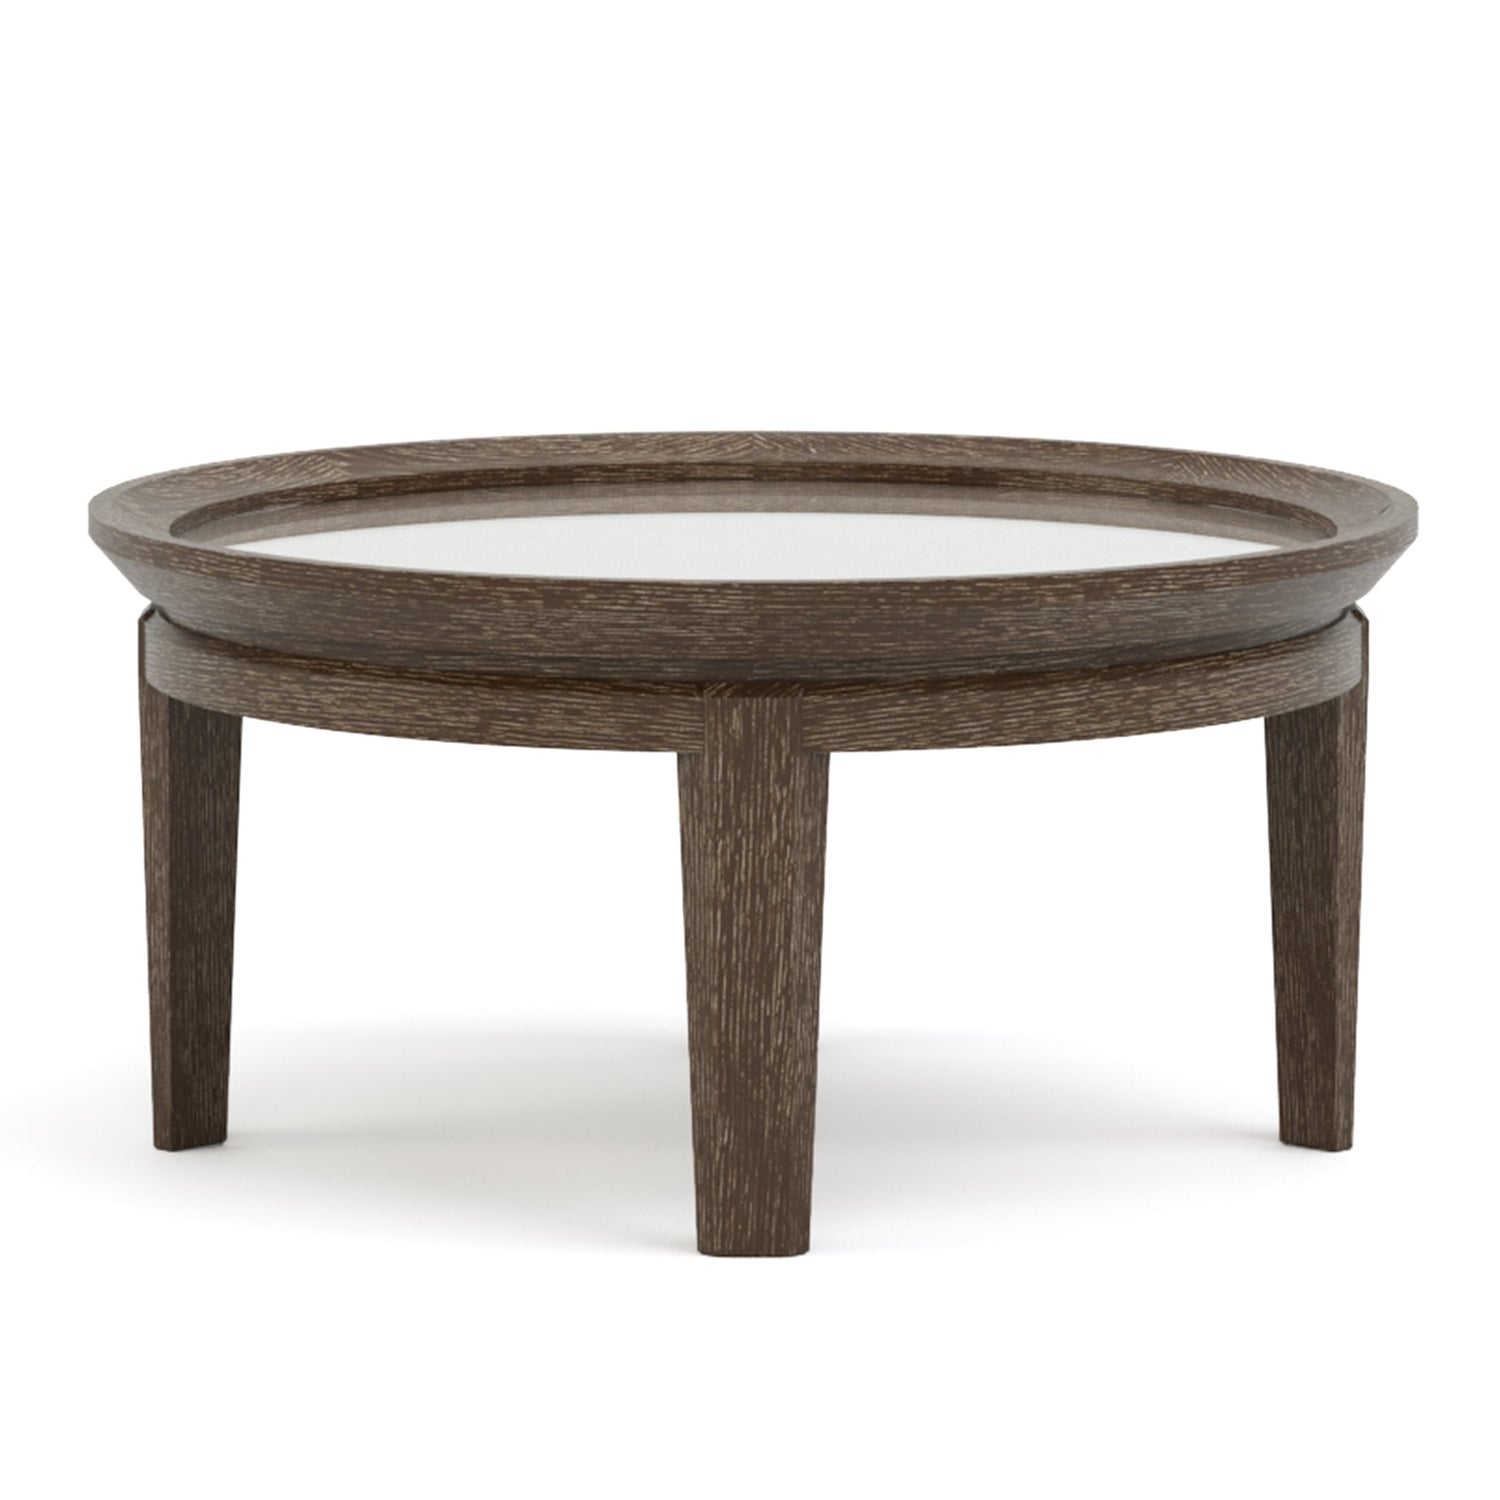 Maidstone 28-inch Round Cocktail Table with Jute in 202 Pier finish